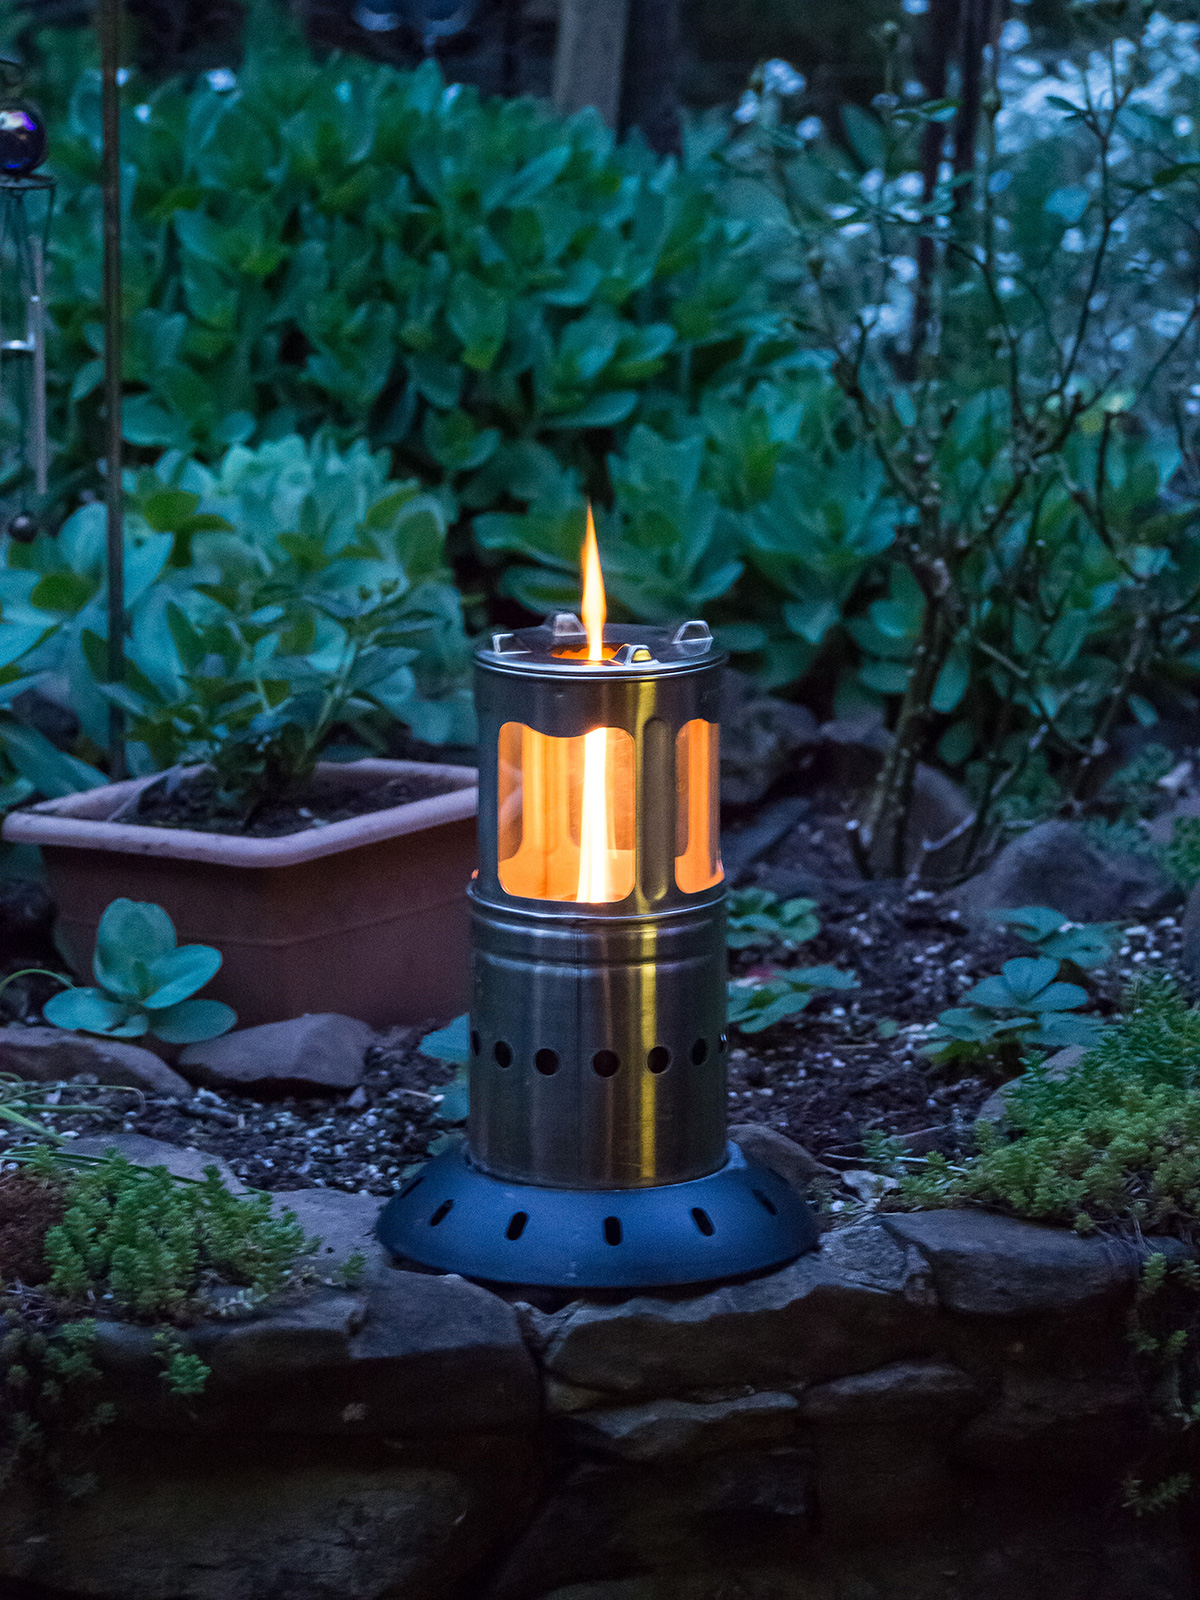 Firefly Wood fired lantern and compact stove